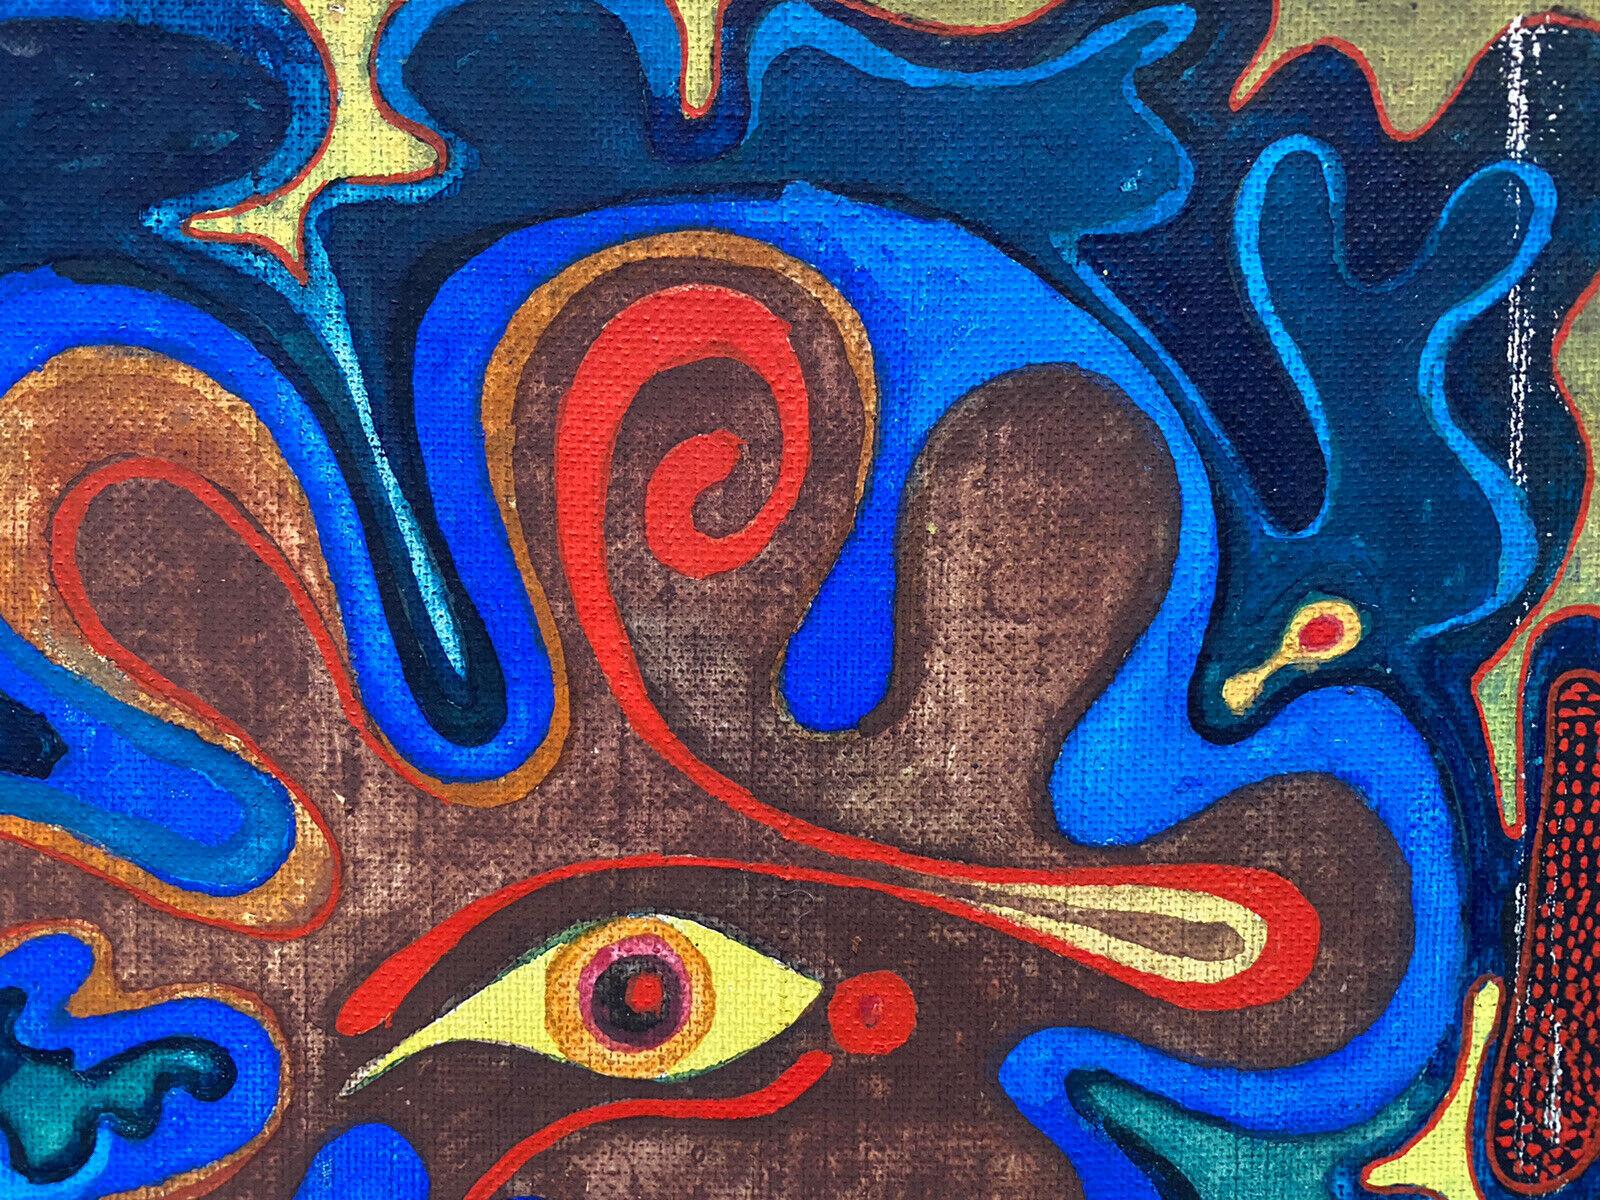 ORIGINAL 1970'S FRENCH PSYCHEDELIC PAINTING - ABSTRACT EYE - Abstract Expressionist Painting by Claude Lagouche